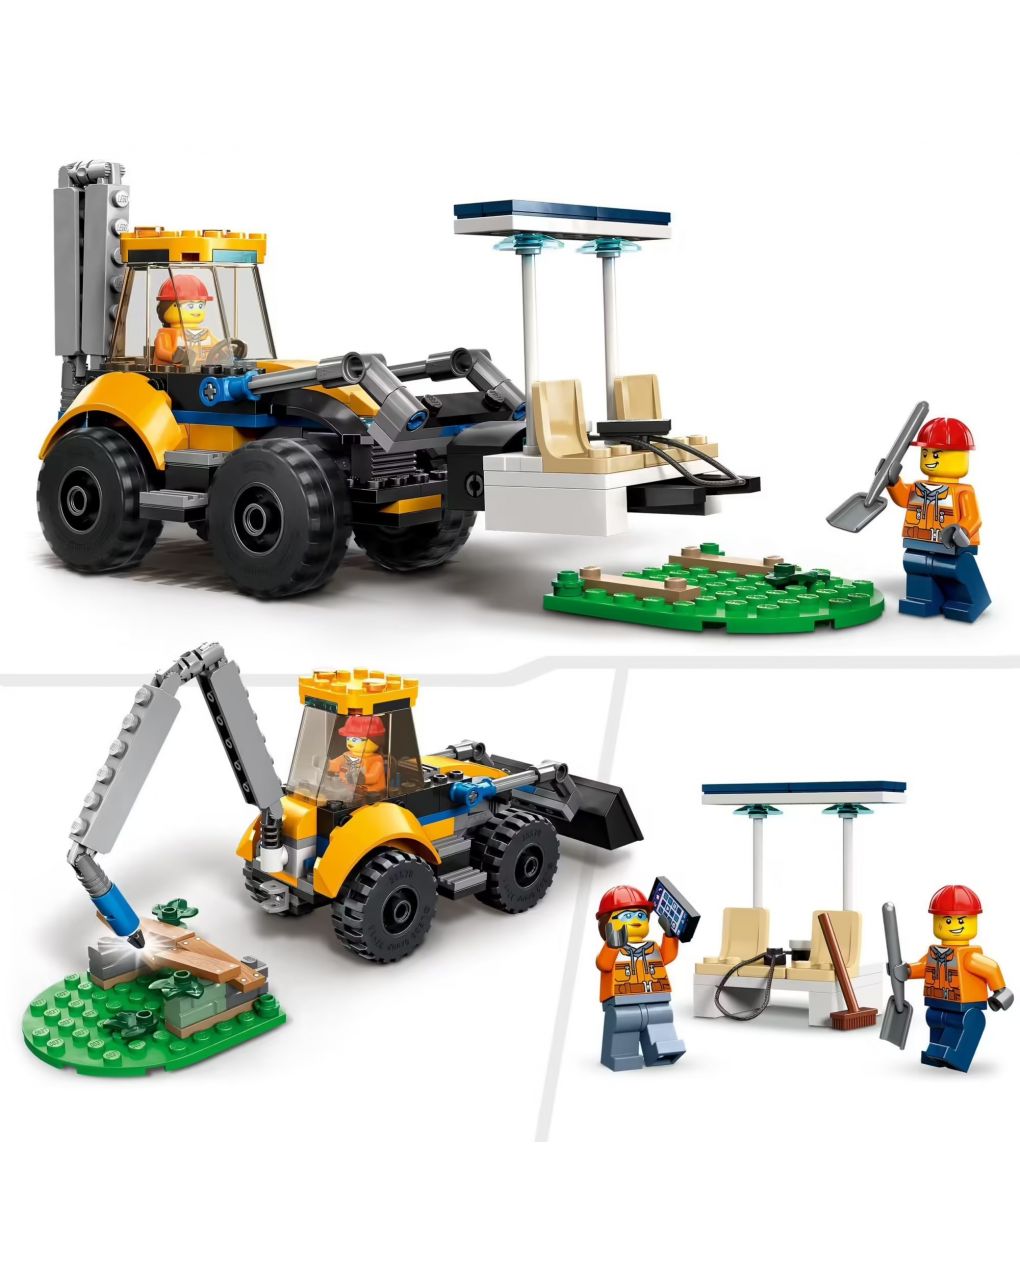 Lego city great vehicles construction digger 60385 - Lego, Lego City, Lego City Great Vehicles